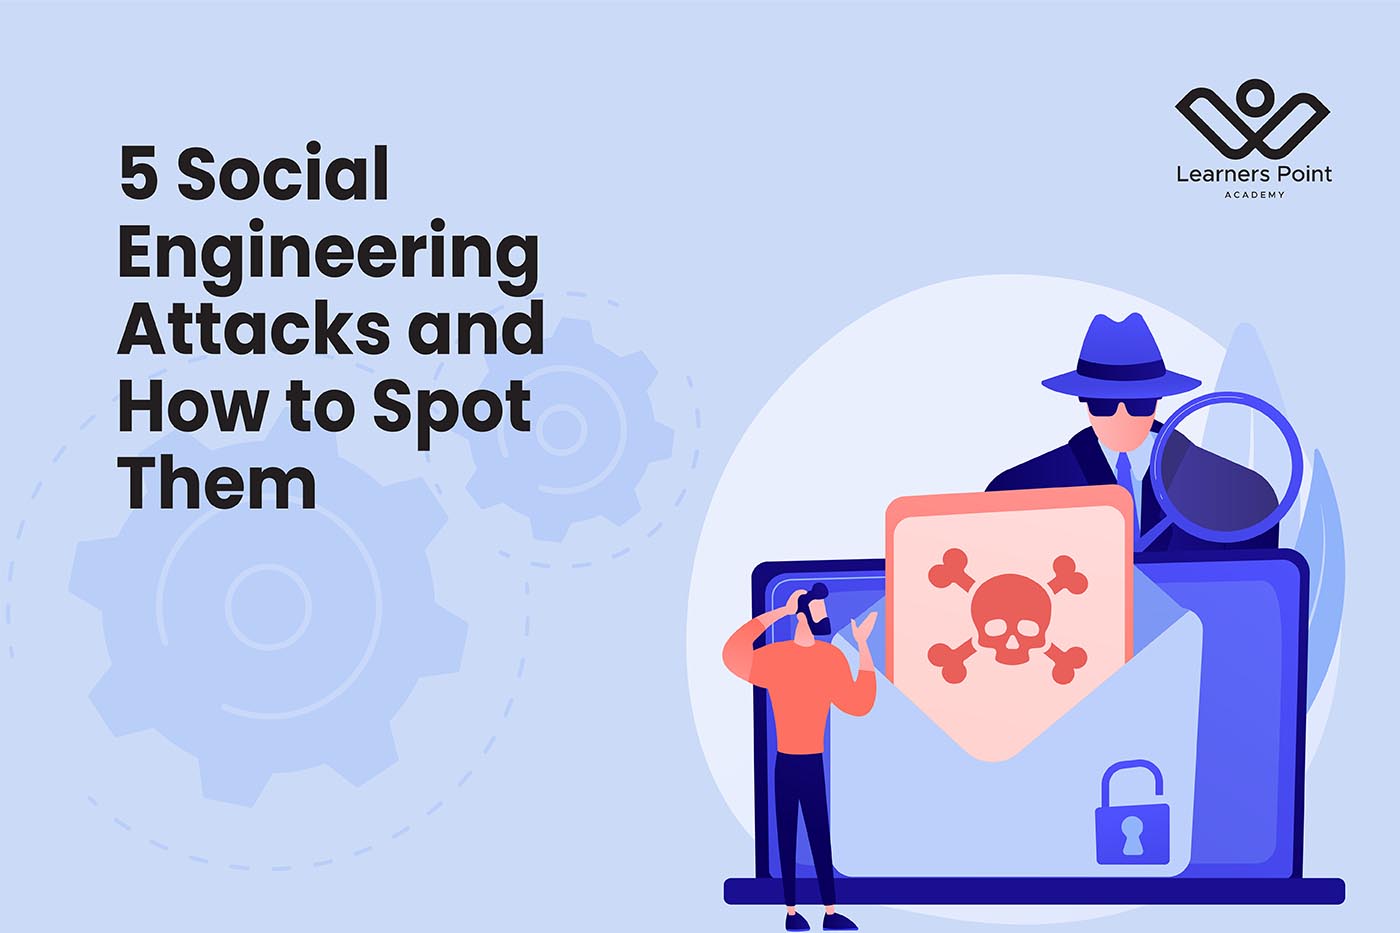 5 Social Engineering Attacks and How to Spot Them